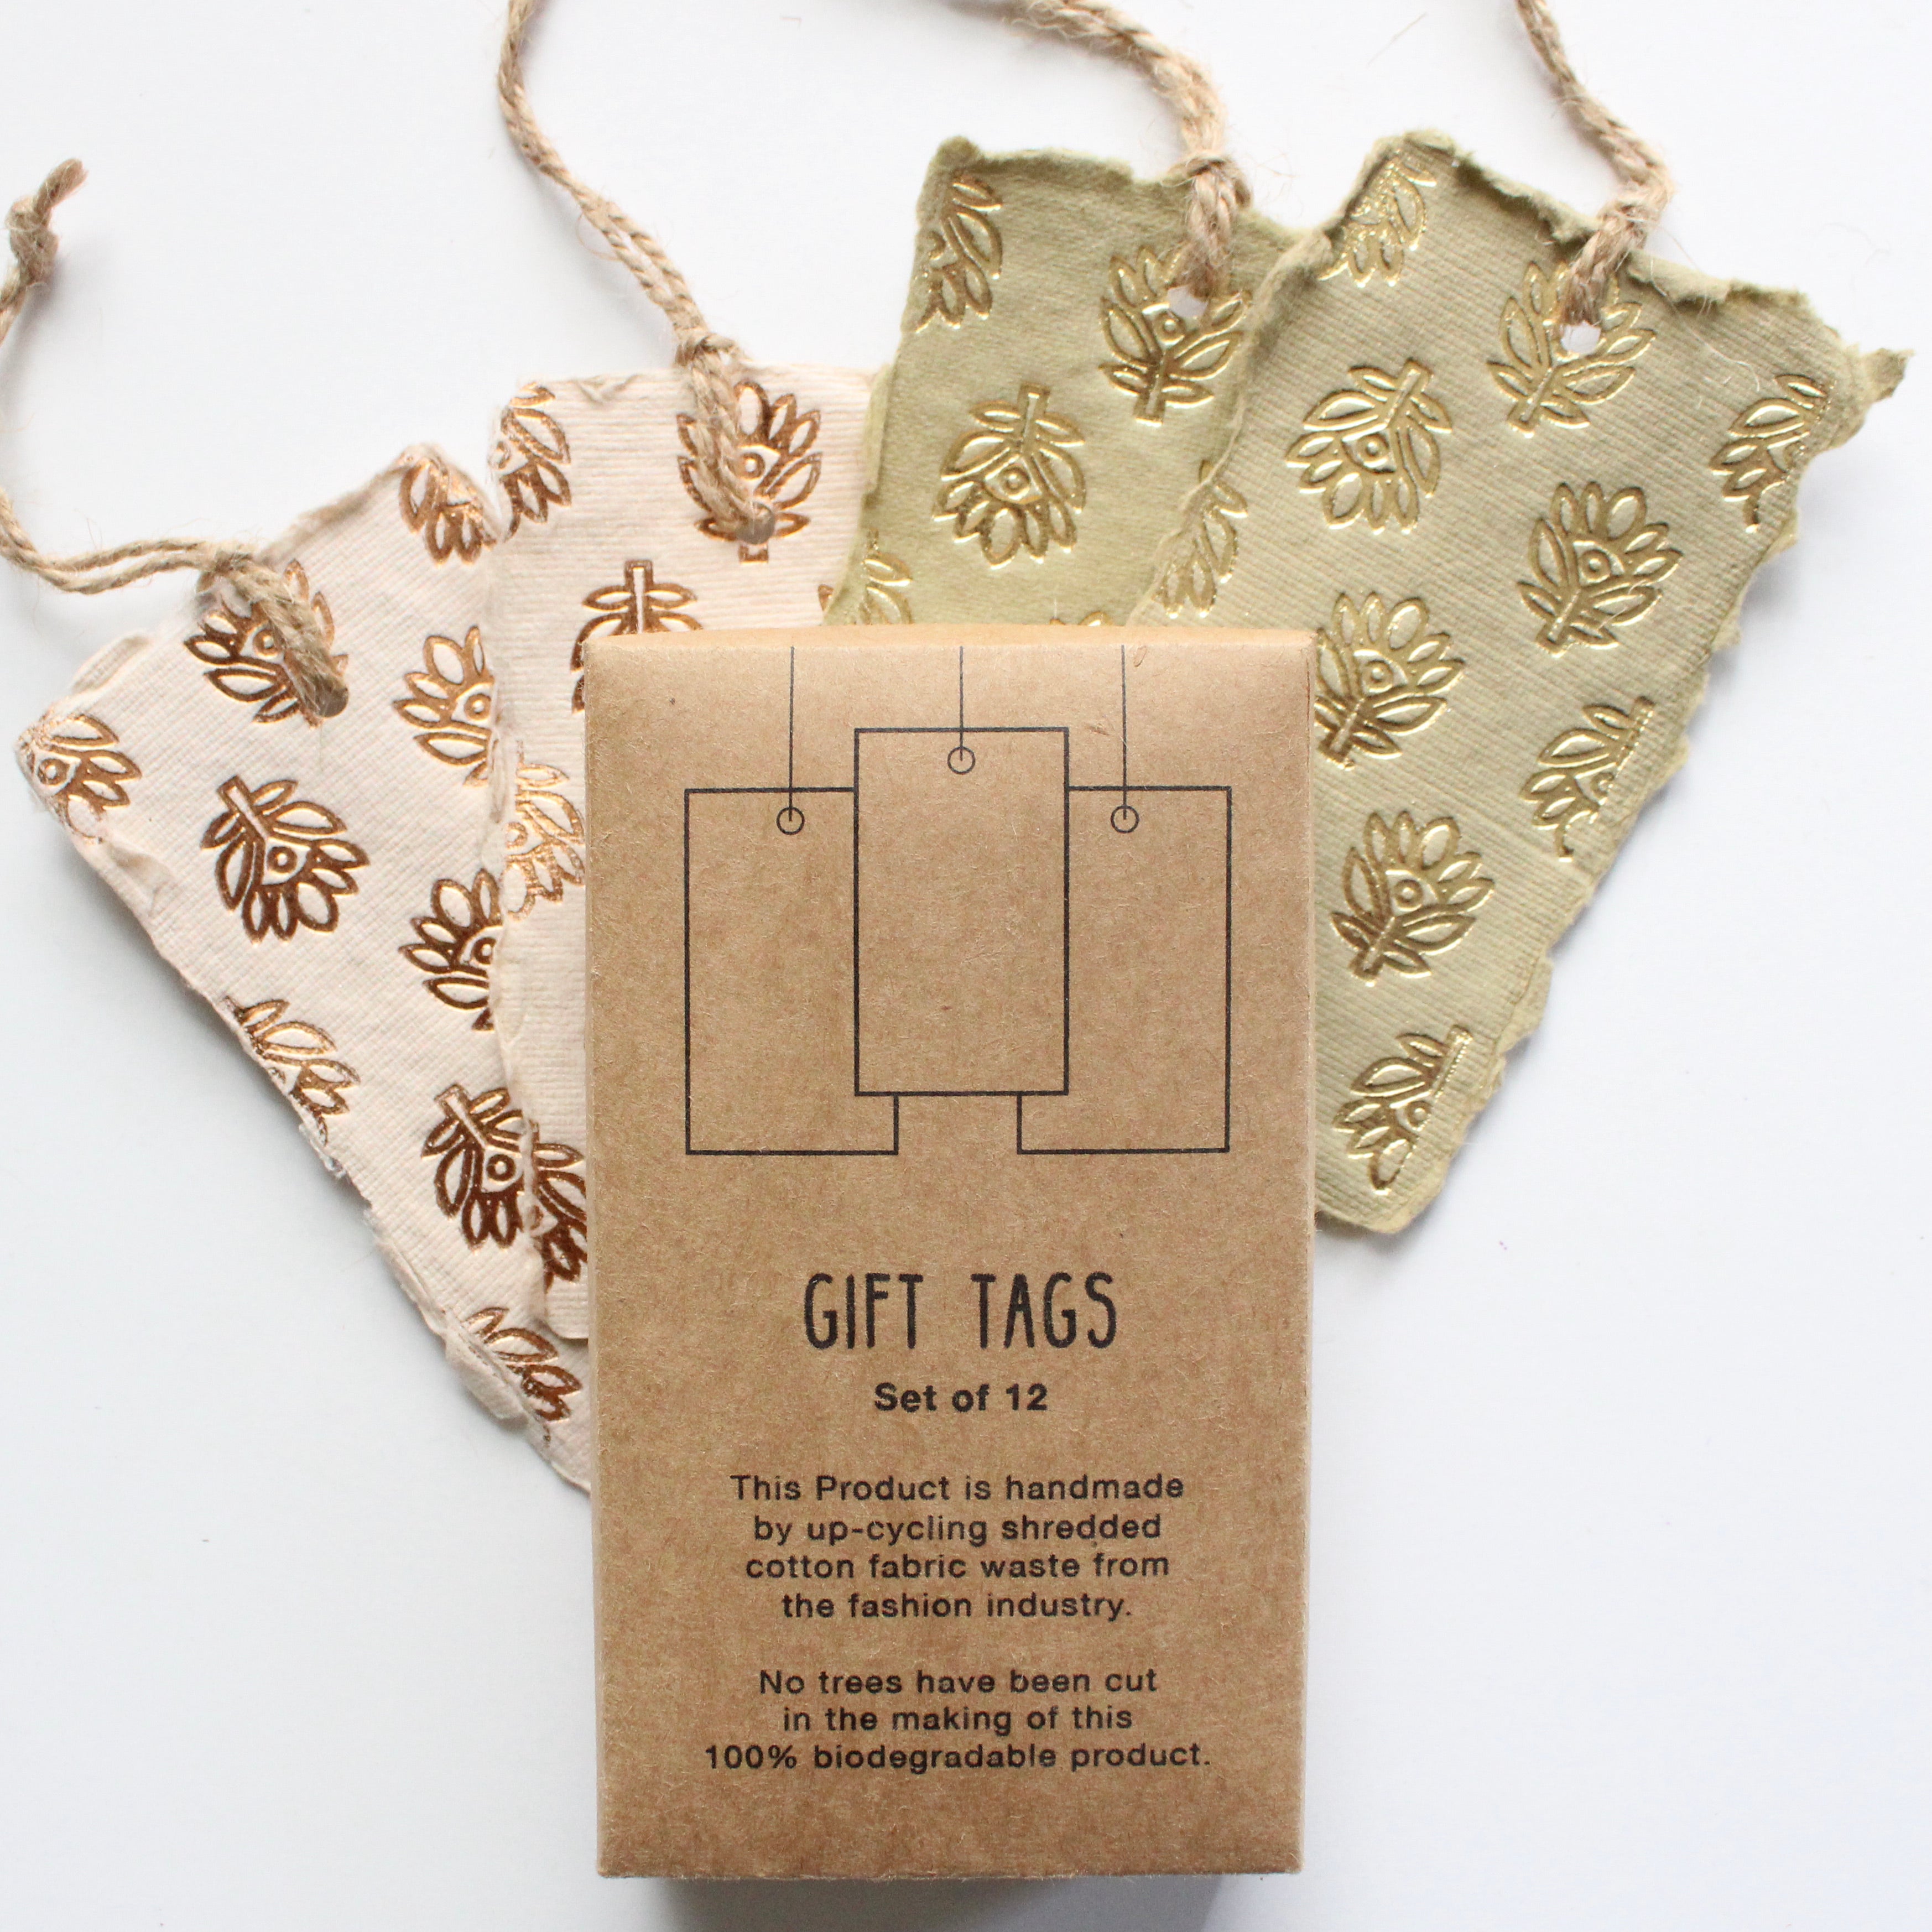 6 Handmade Gift Tags to try – Beading Brilliant